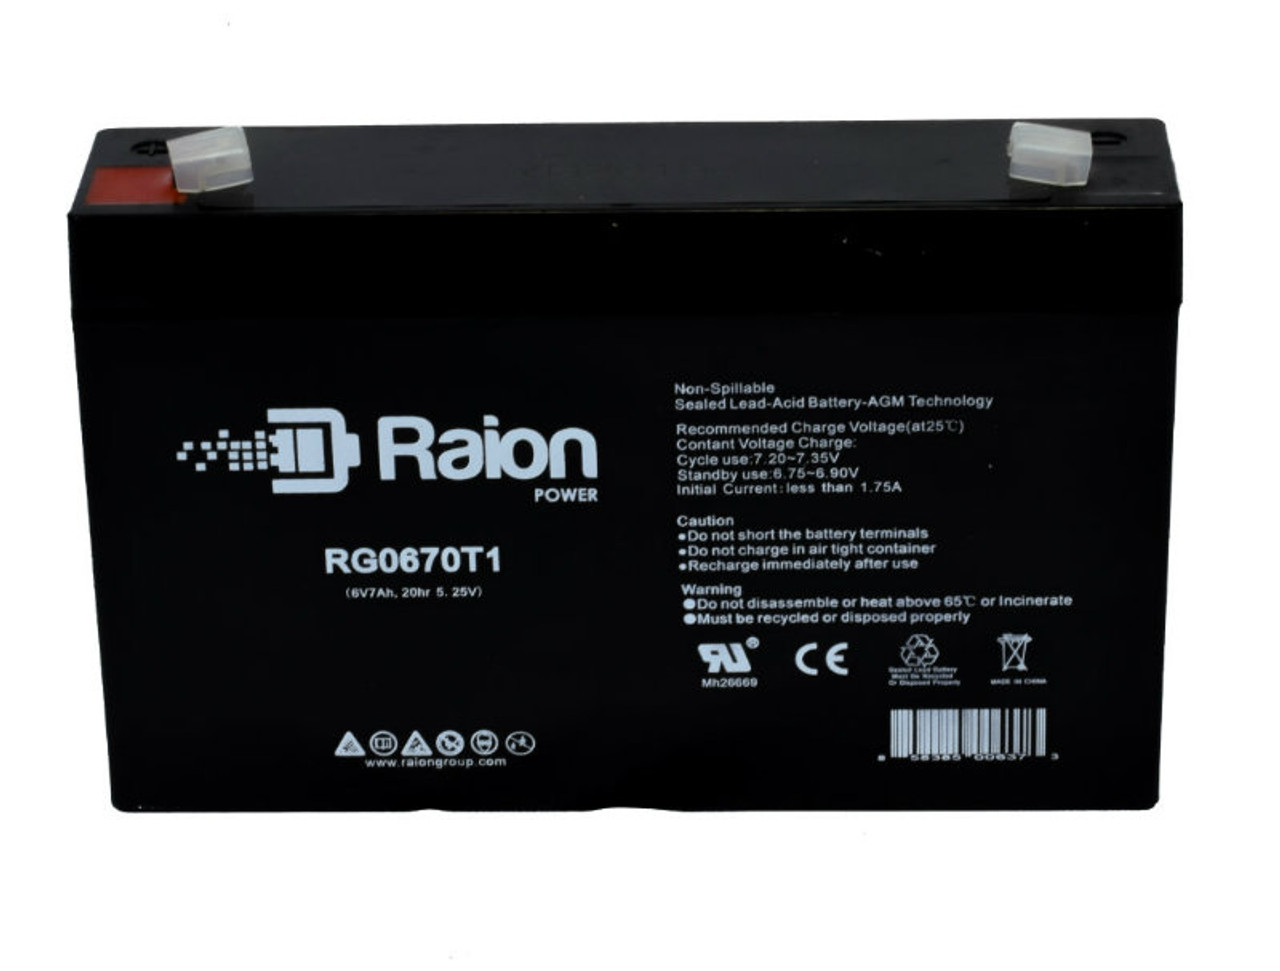 Raion Power RG0670T1 Replacement Battery Cartridge for Ivy Biomedical Systems 702 Monitor